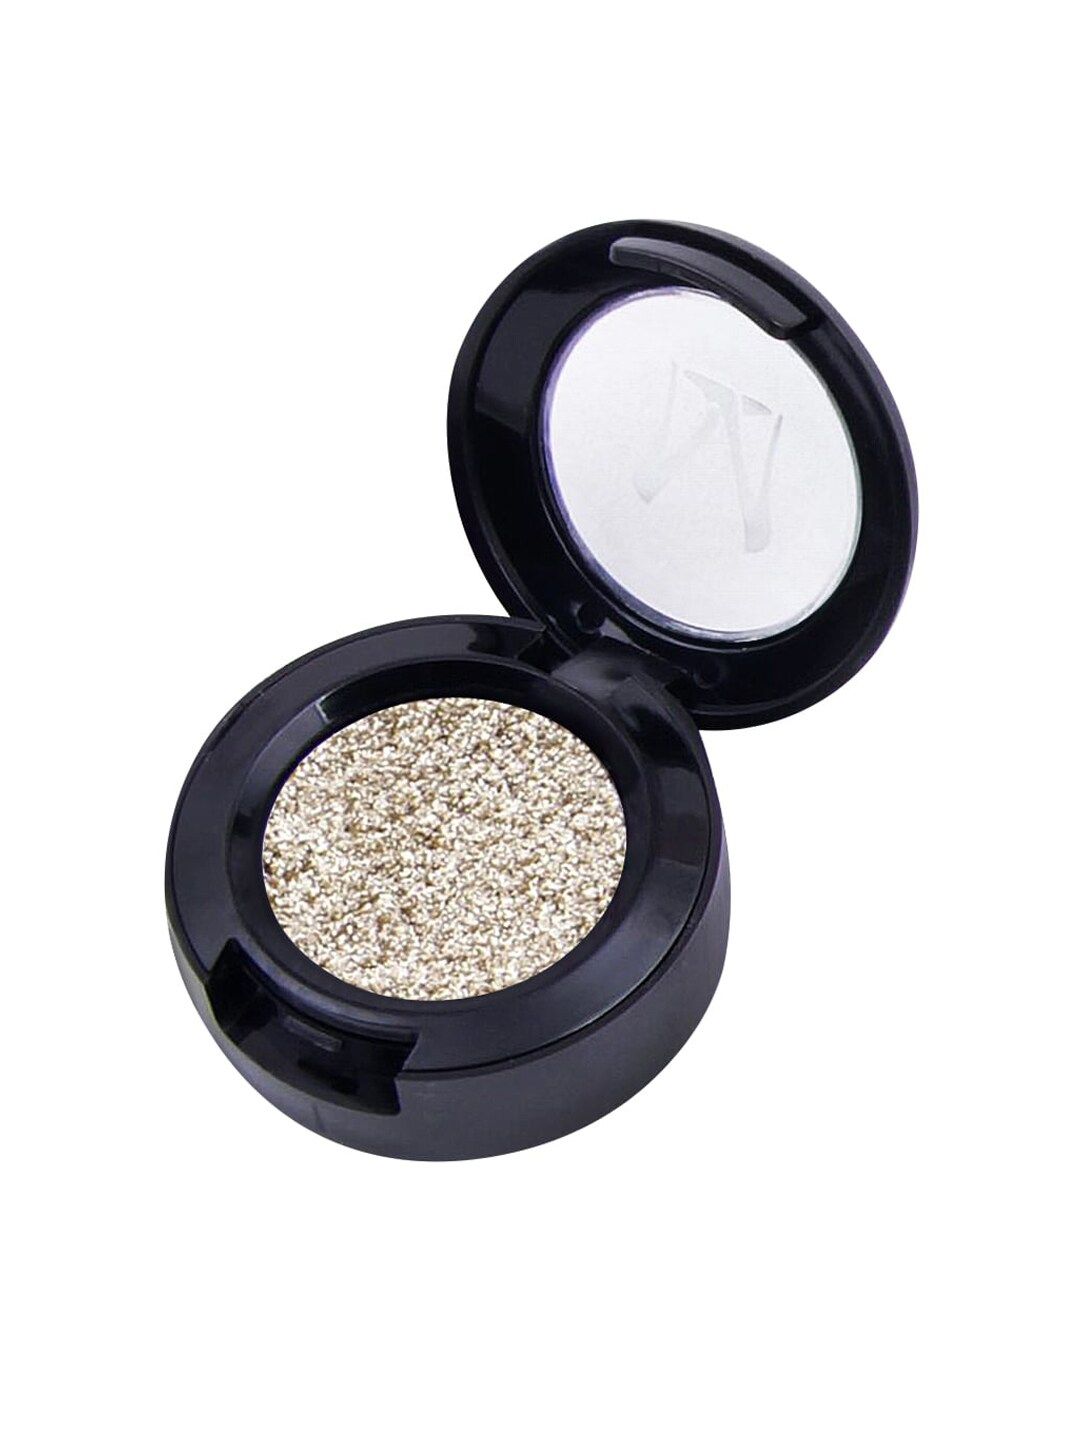 Misss Rose Single Color Eyeshadow Shining Glitter Glow Pigment Silver Sand 7001-074 08 Price in India